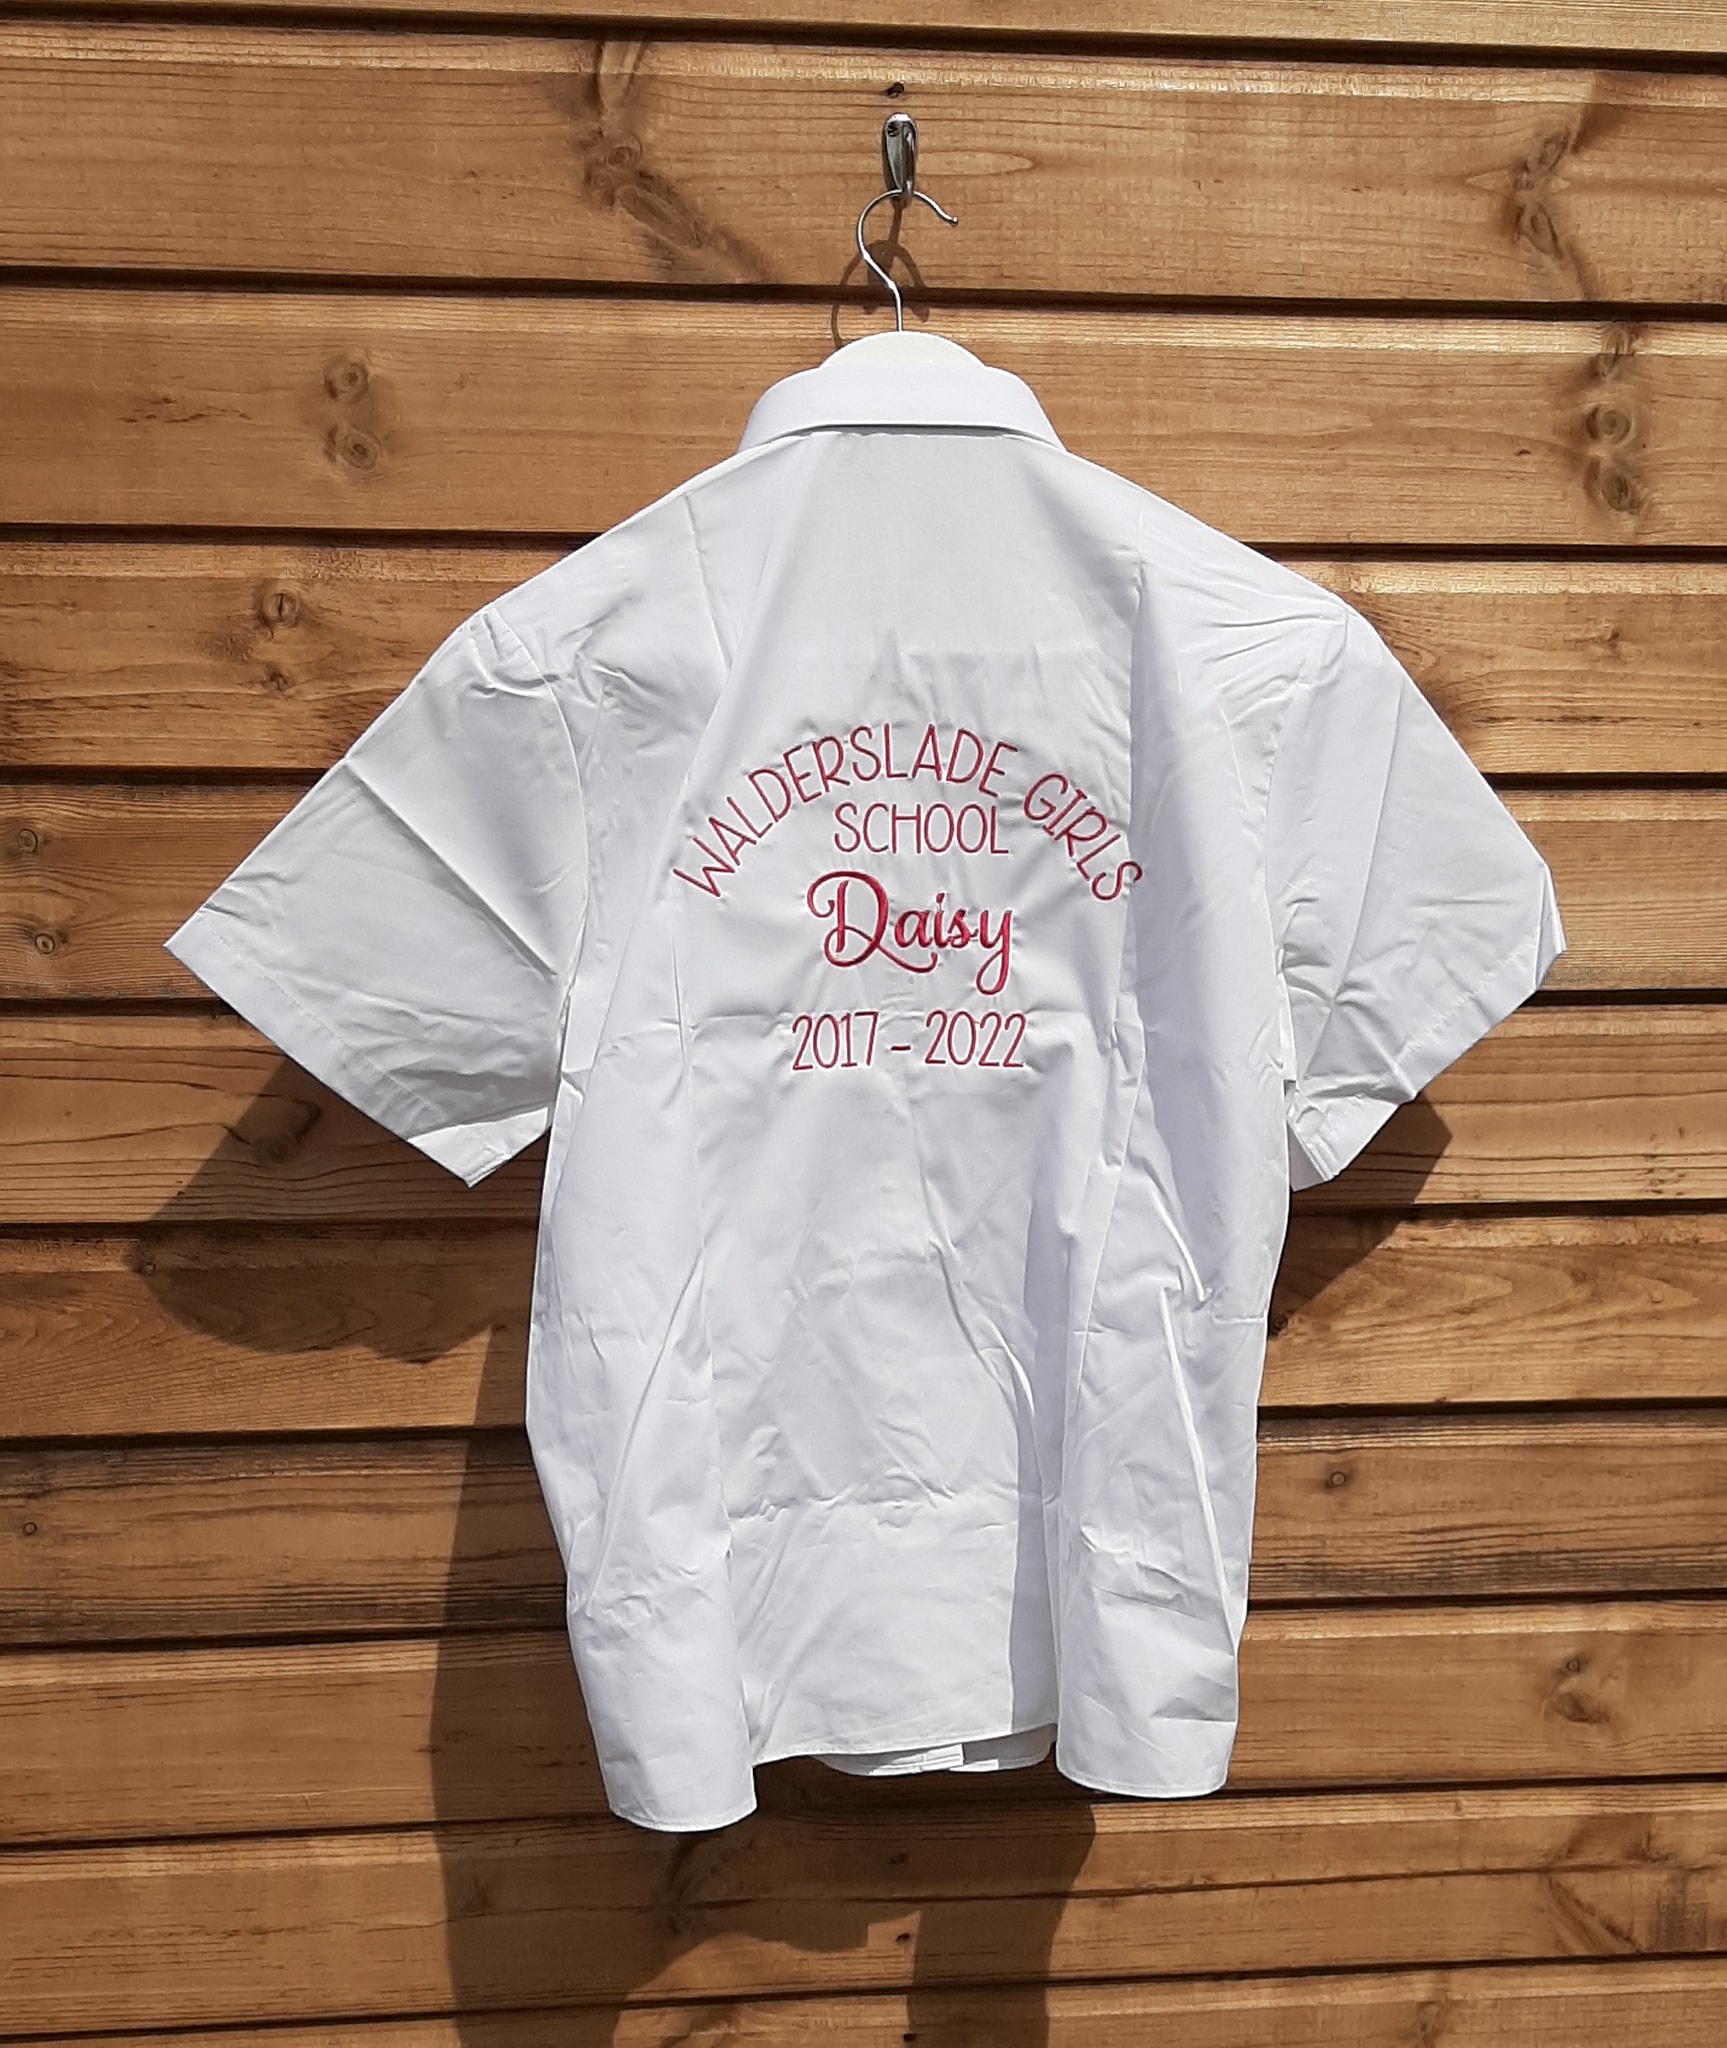 Leavers signing shirt schools last day customisable personalised embroidered shirt with school name and dates perfect for primary and secondary school daisy